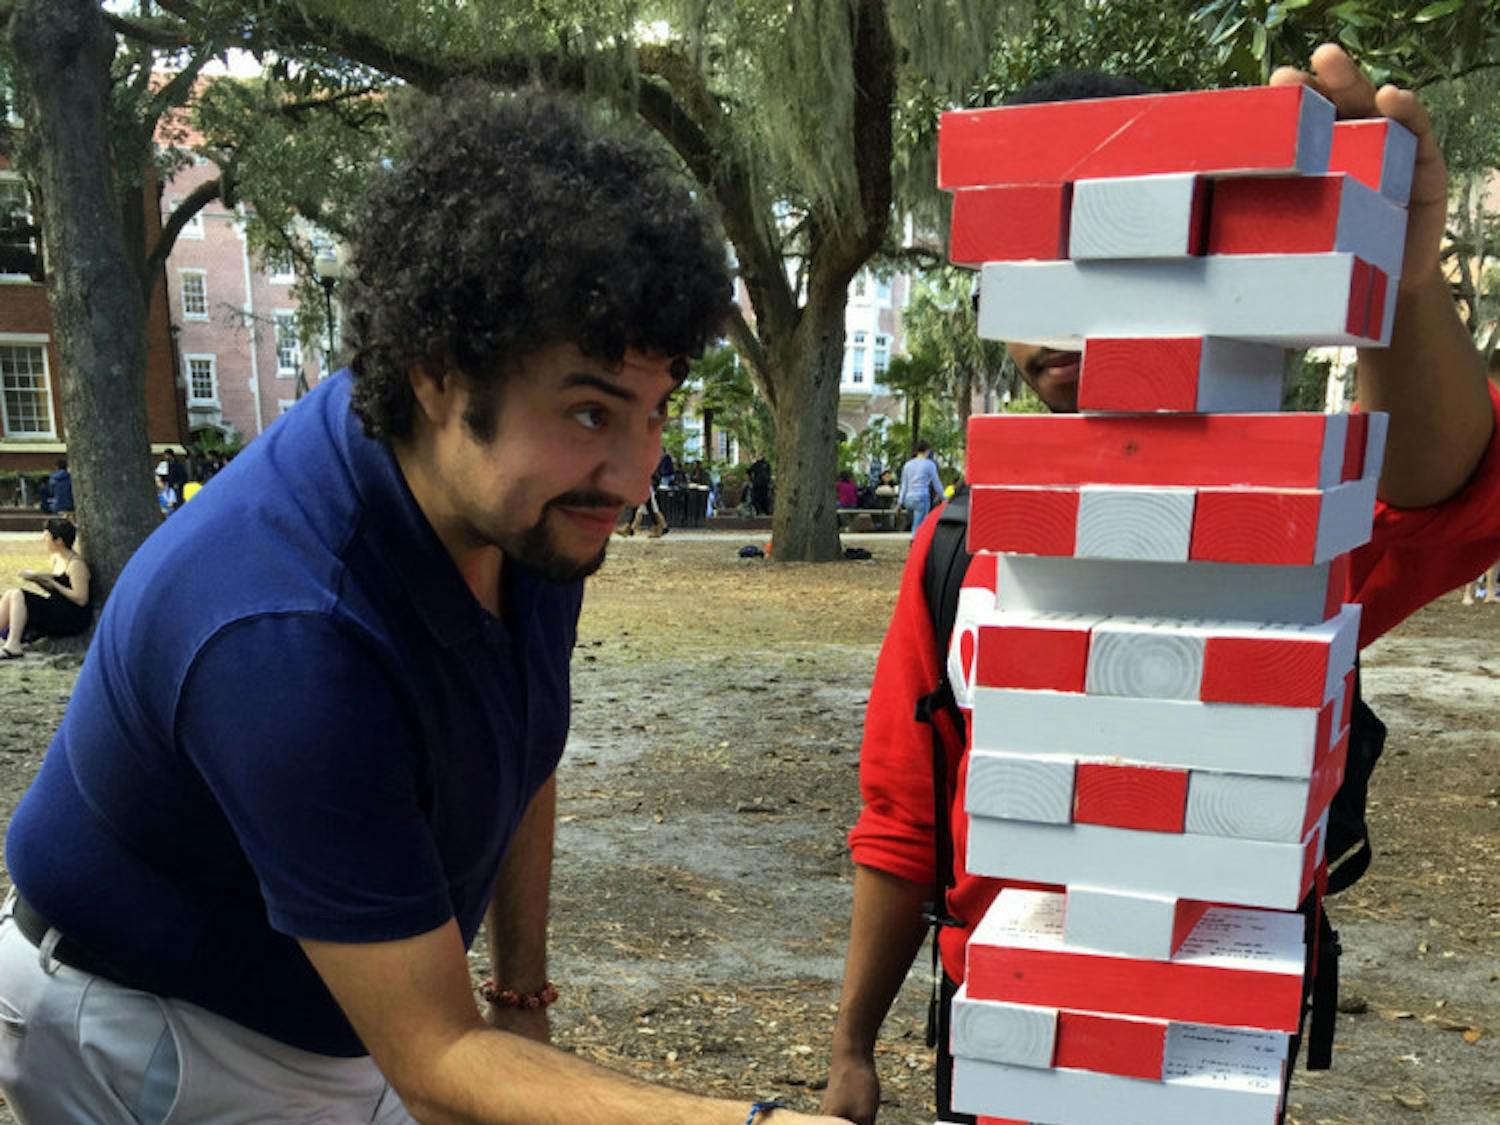 Rafael Cruzado, 27, an employee at UF’s multicultural affairs, takes a piece from Omega Delta Phi held its first “Jiant Jenga” game. Each of the 60 silver and red pieces had a fact about human trafficking written on it.